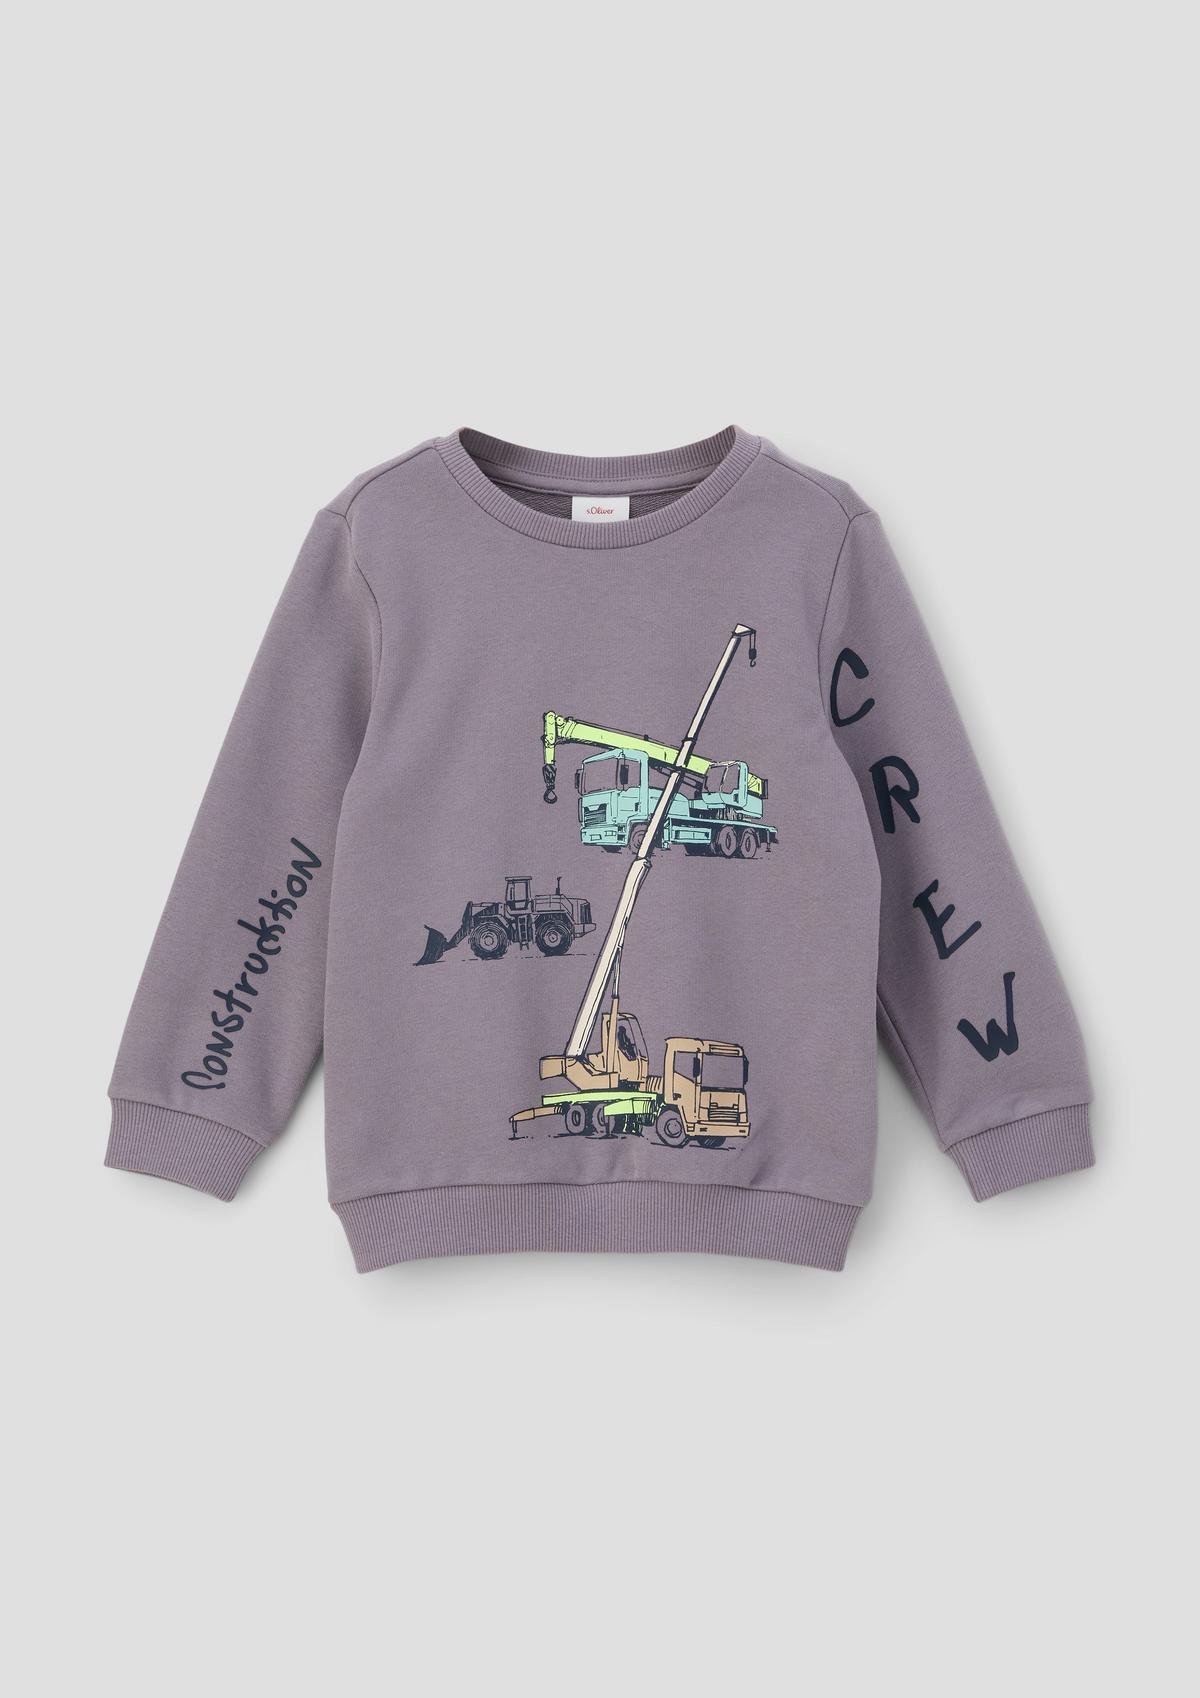 Sweatshirts and for boys online knitwear